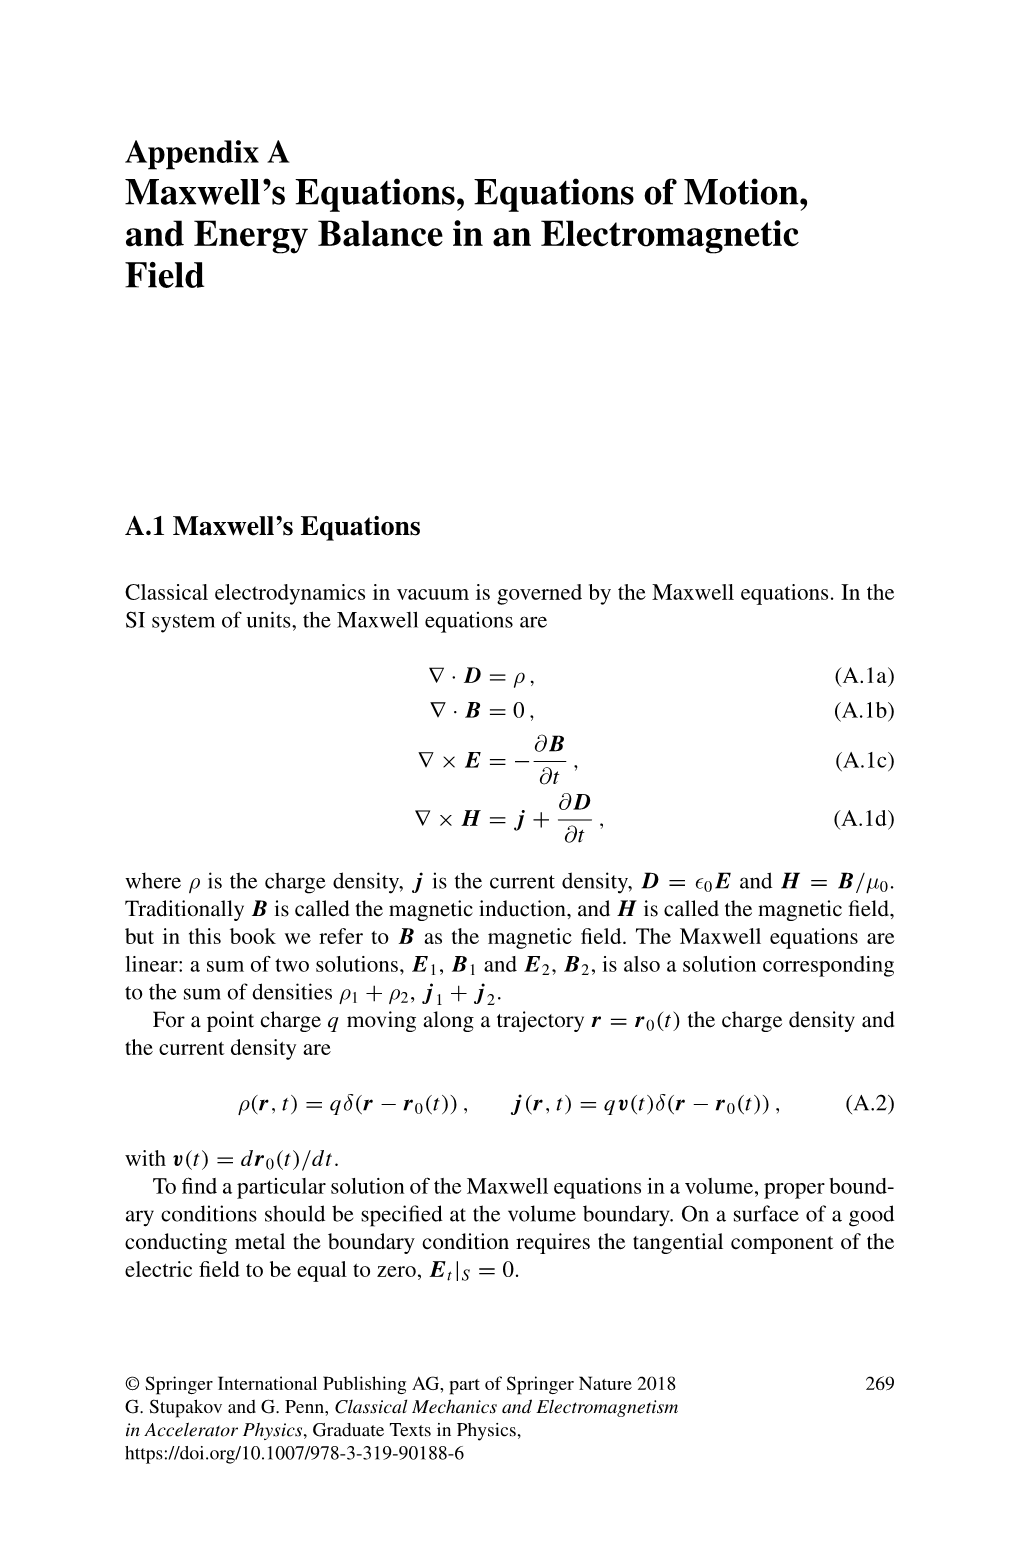 Maxwell's Equations, Equations of Motion, and Energy Balance in An